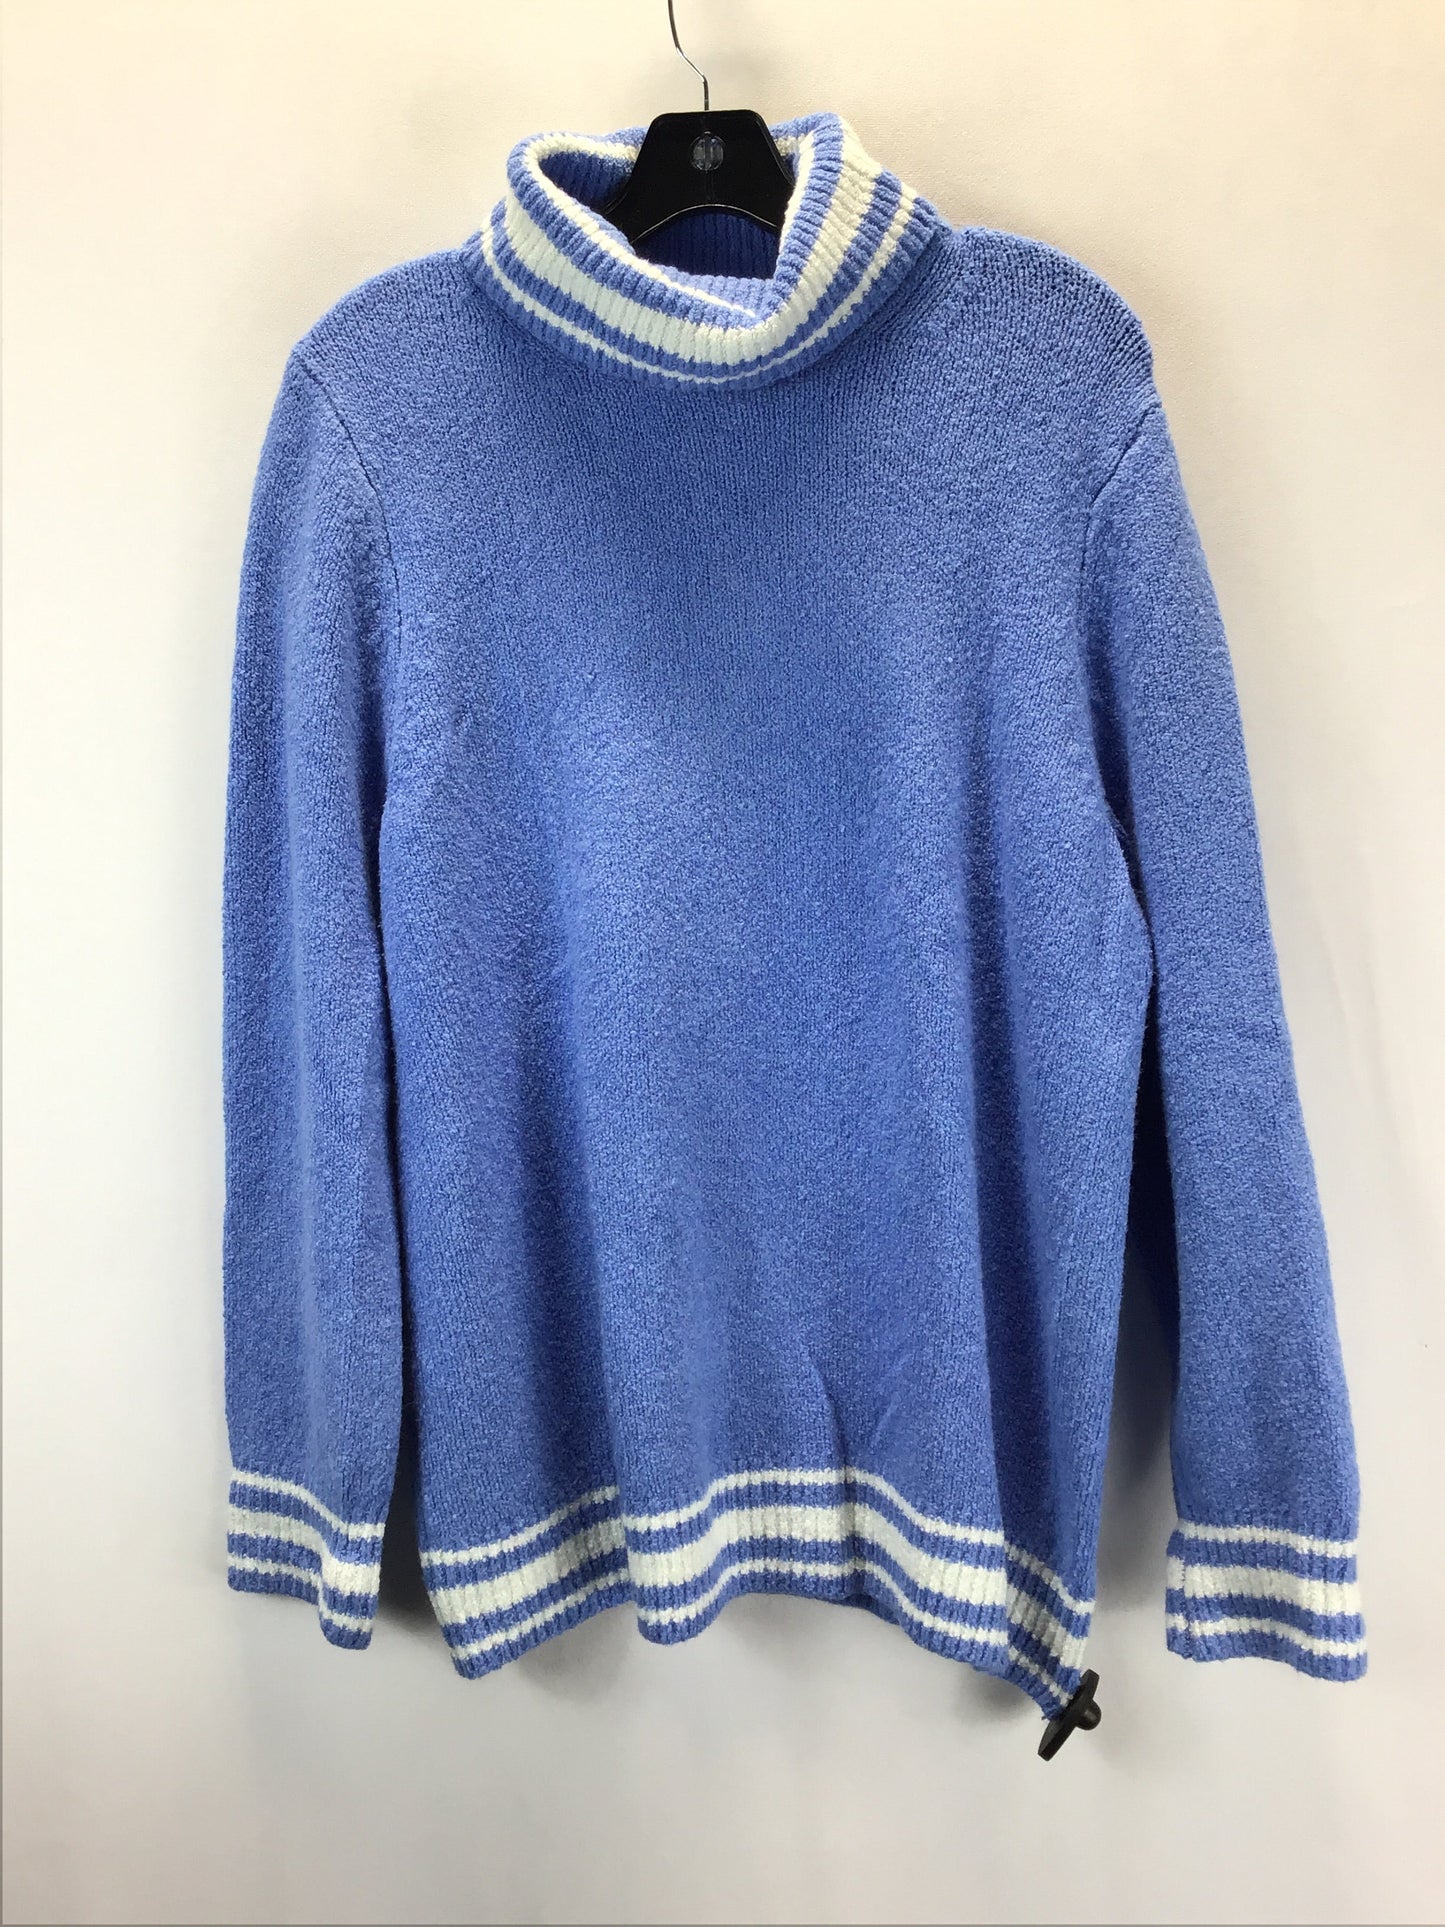 Sweater By Talbots  Size: 1x